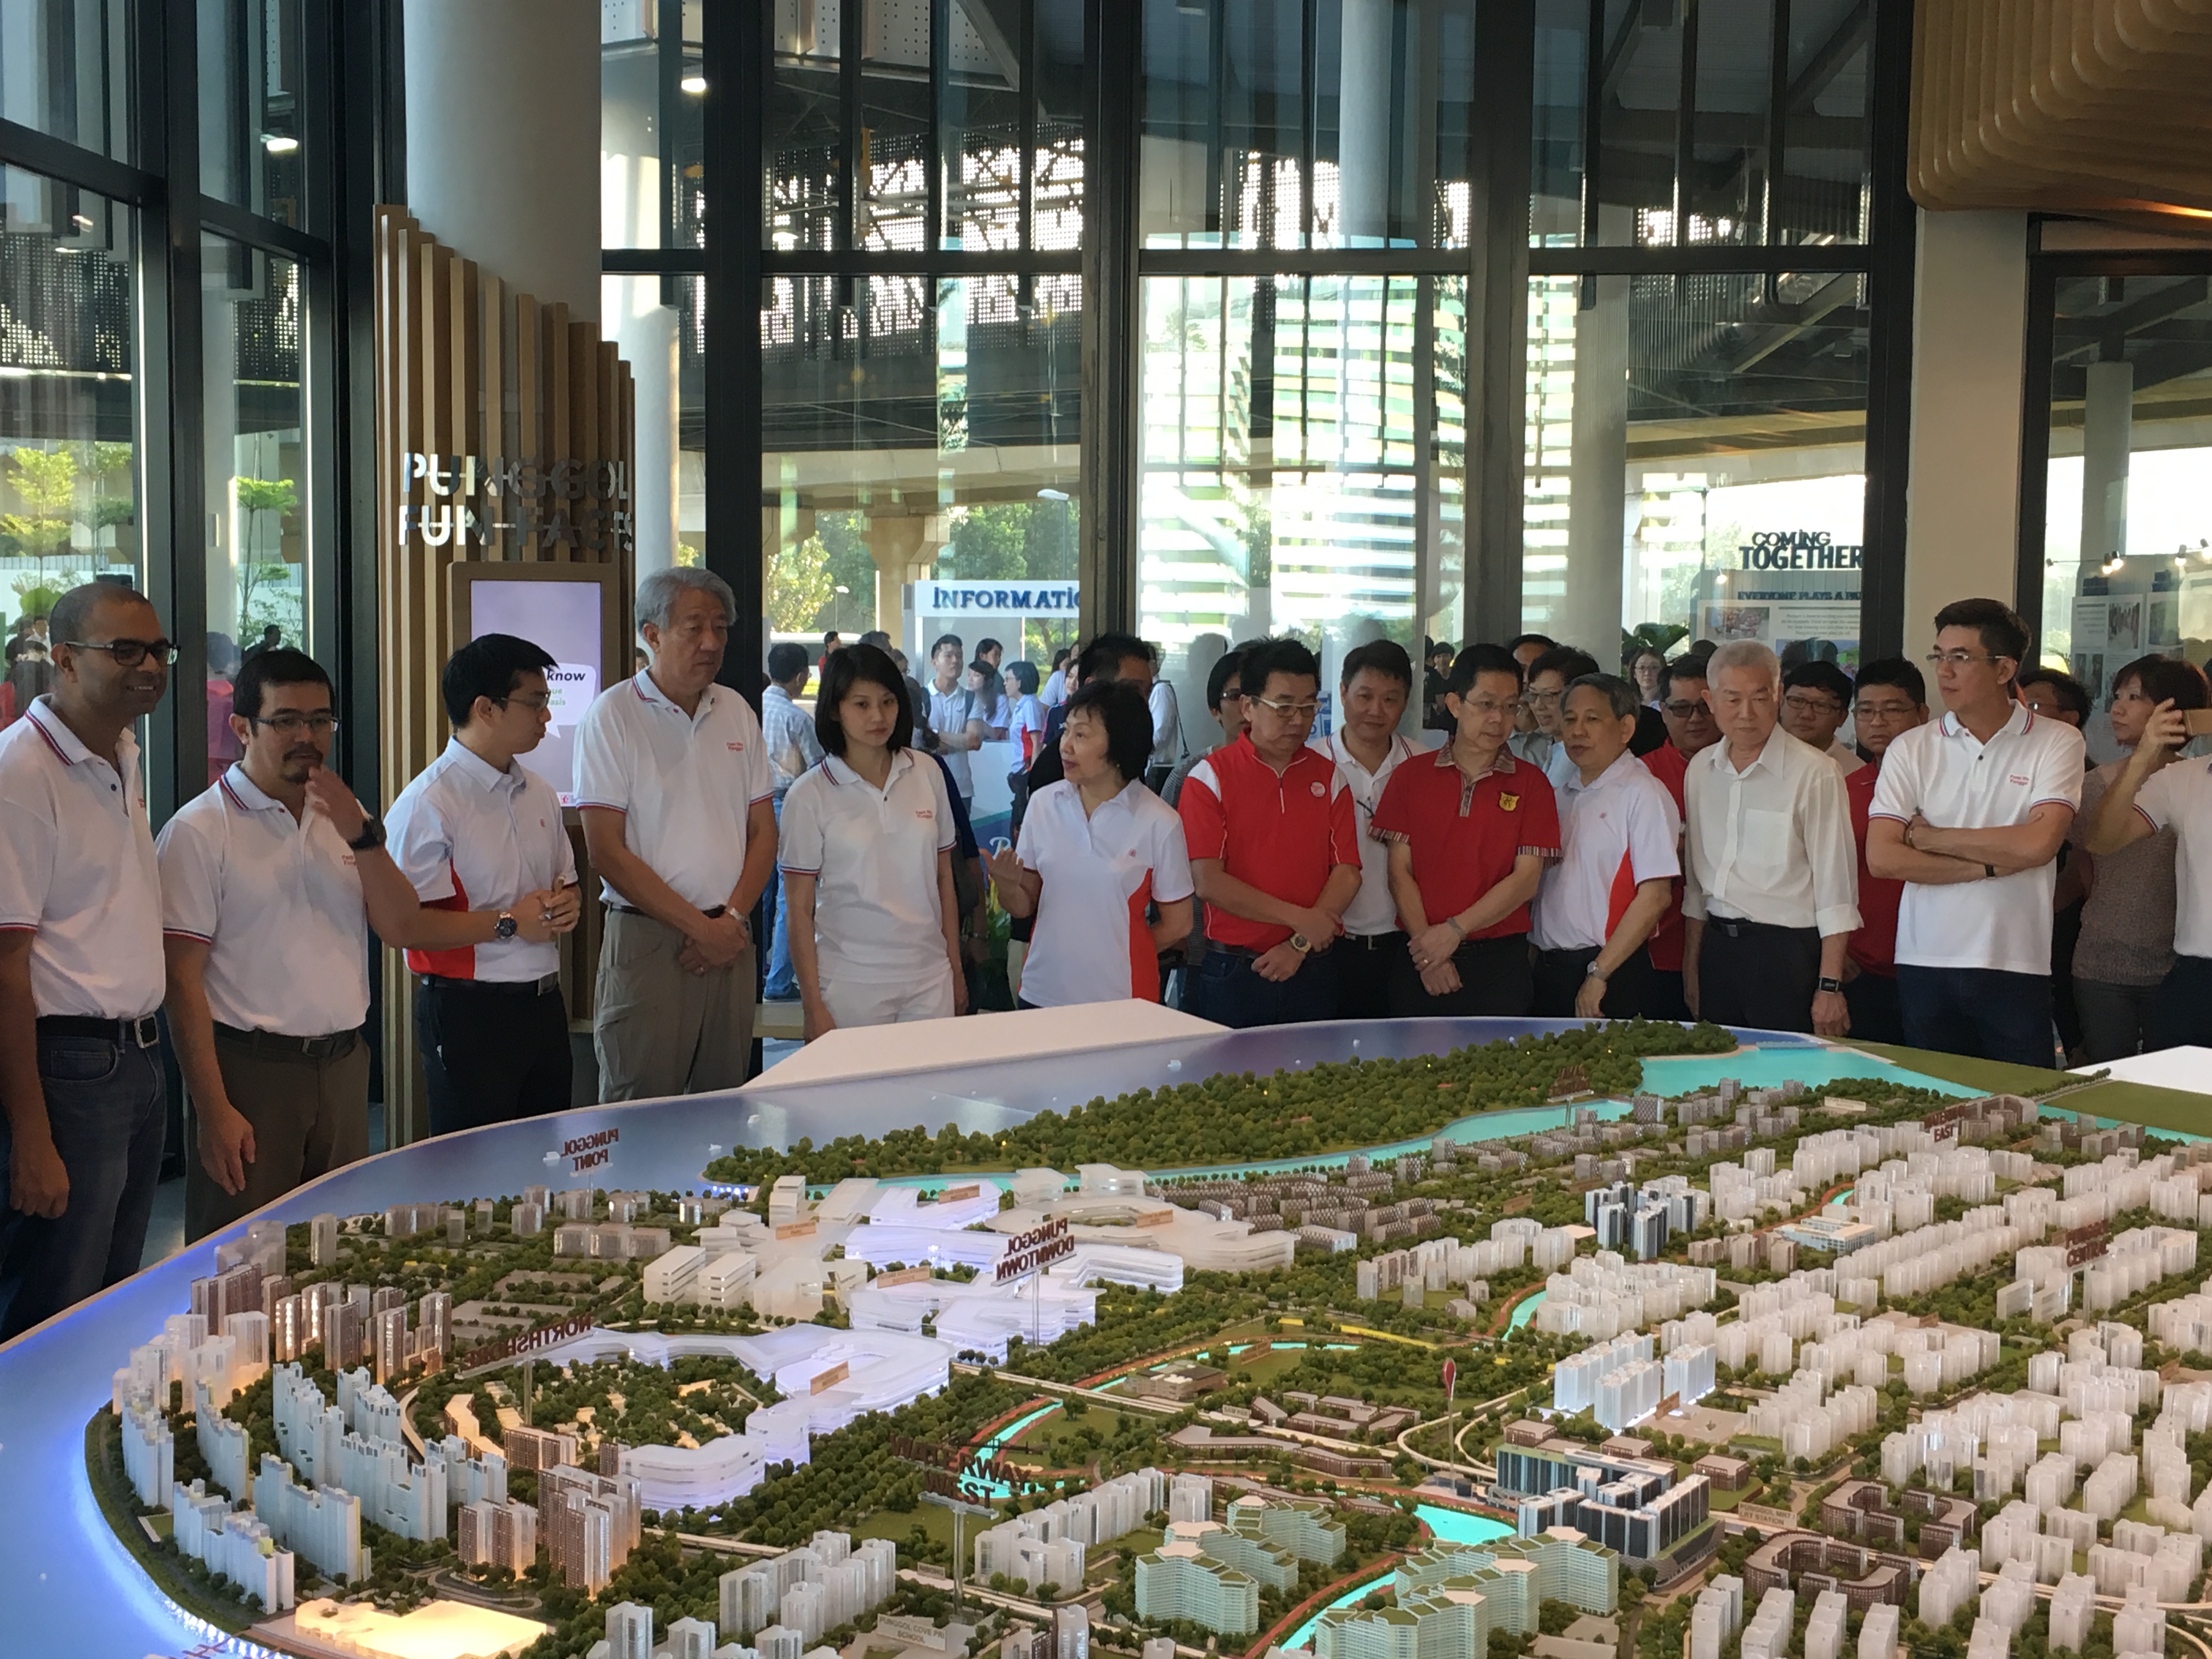 DPM Teo Chee Hean at Opening of Punggol Town Square on 15 Jan 2017